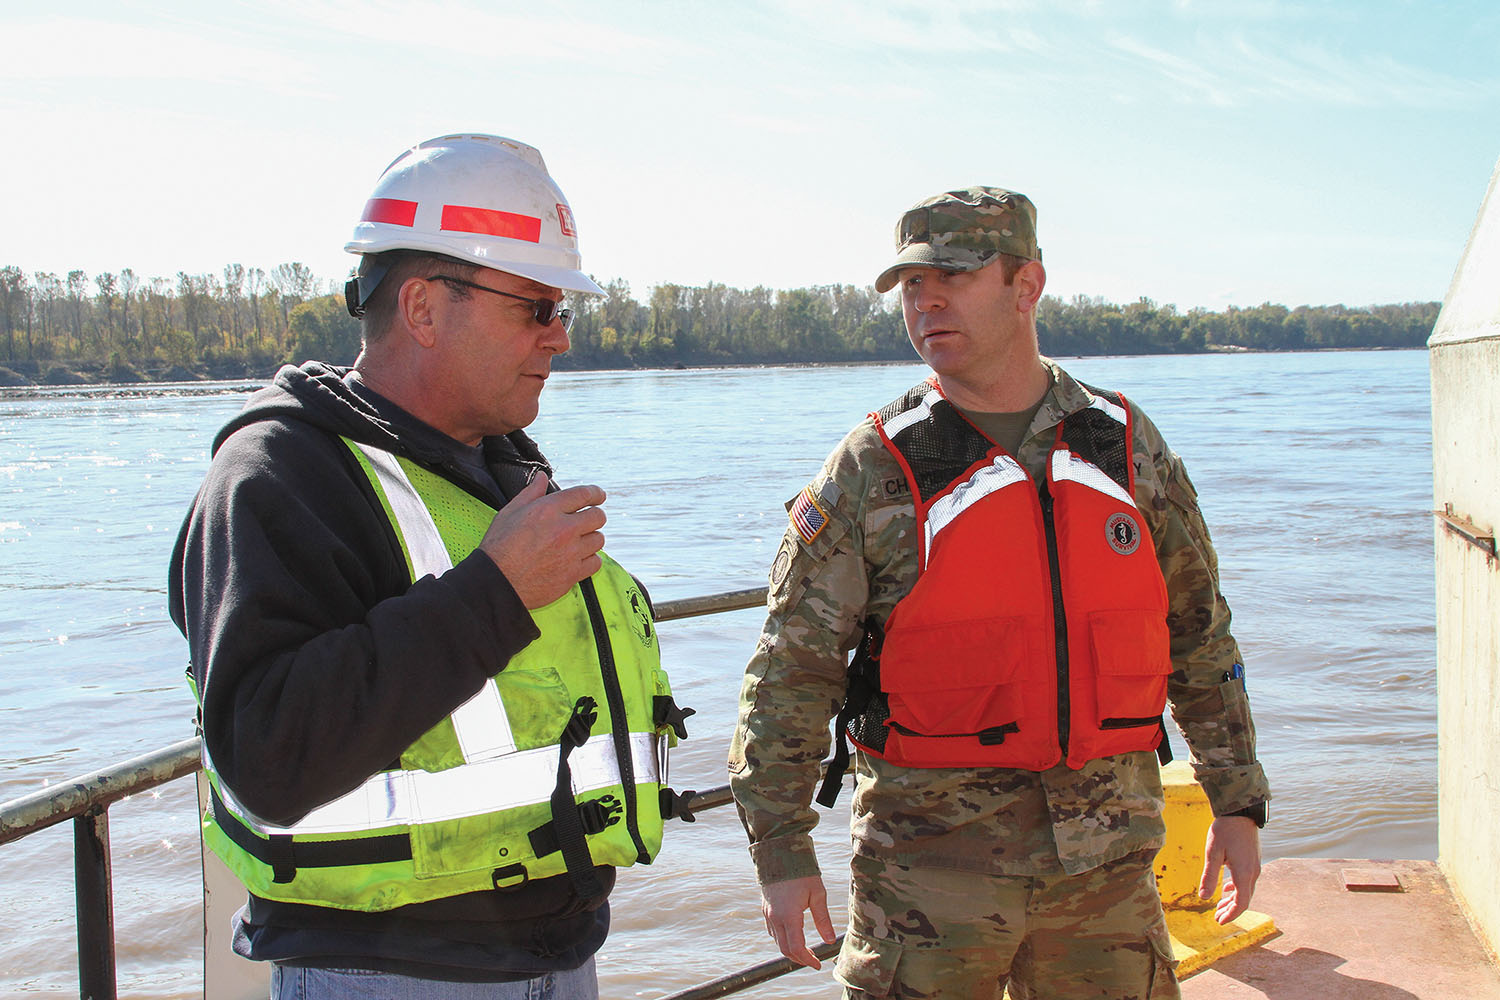 Jake Bernhardt, chief of physical support for the Goetz, explains the operations of the dredge to Maj. John Chambers, deputy commander for the Kansas City District, on the Missouri River near St. Charles, Mo.